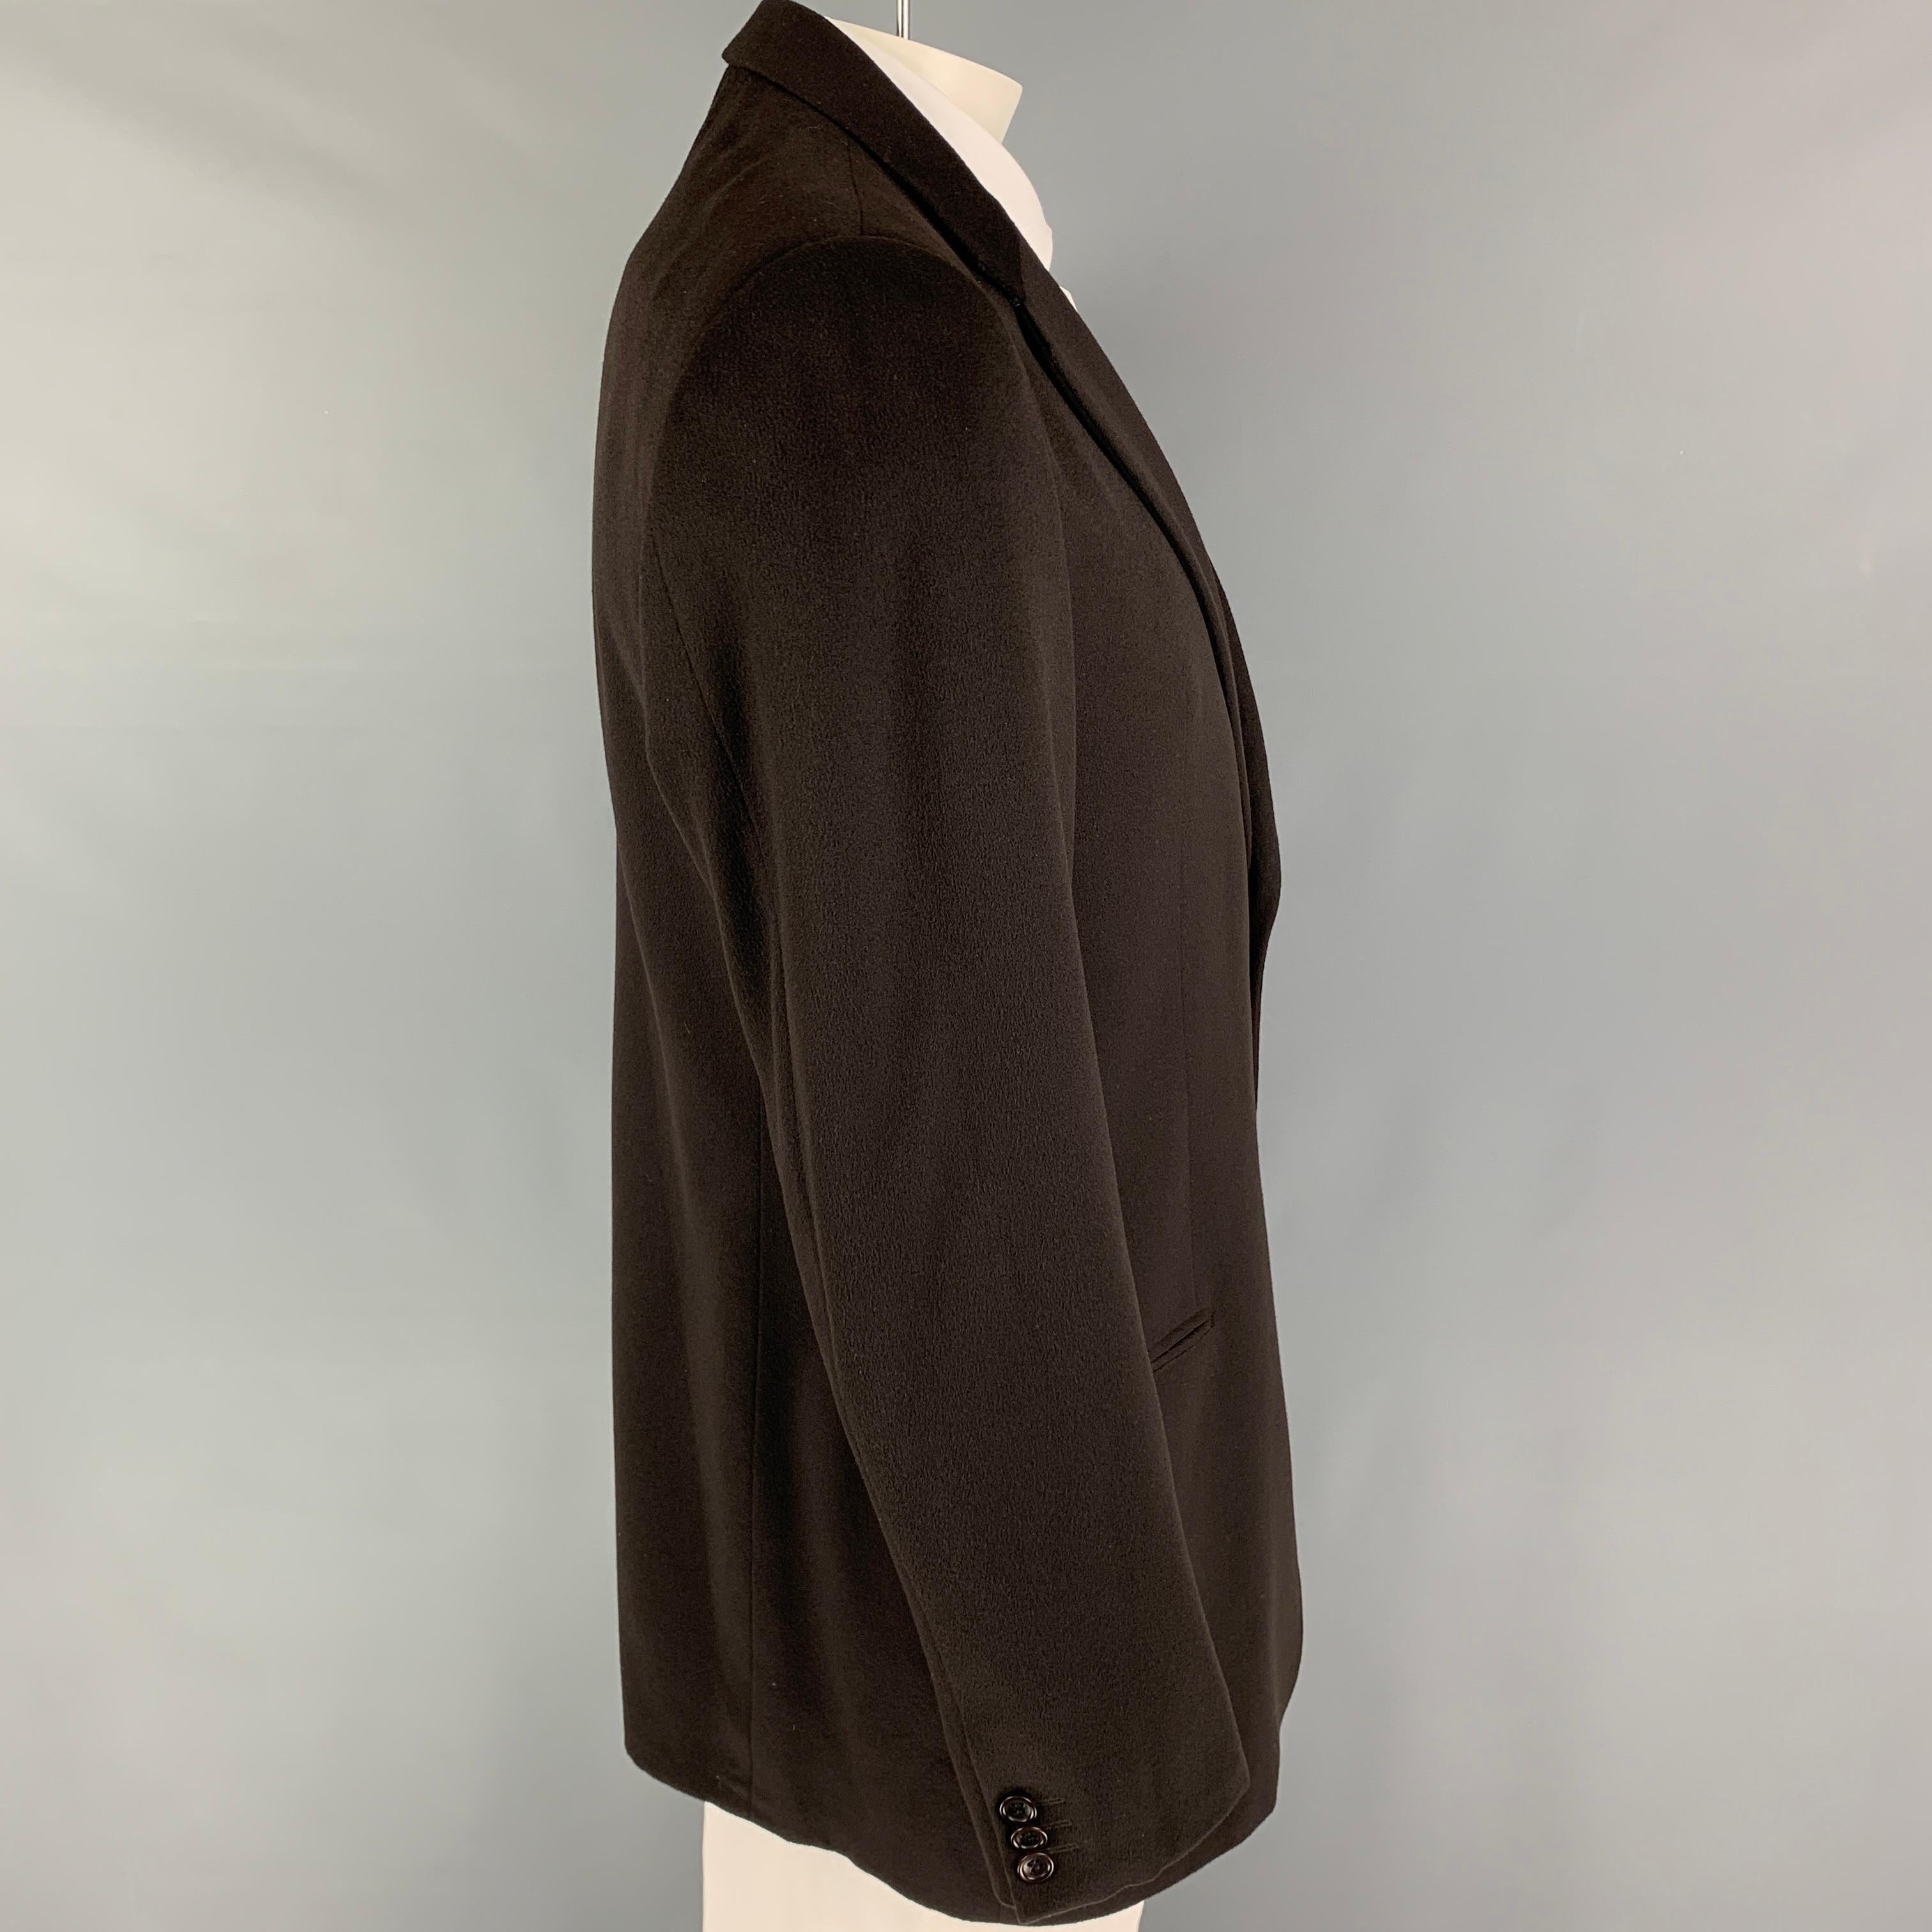 ARMANI COLLEZIONI sport coat comes in a brown cashmere with a full liner featuring a notch lapel, slit pockets, and a double button closure. Made in Italy. 

Very Good Pre-Owned Condition.
Marked: 44/L

Measurements:

Shoulder: 19.5 in.
Chest: 44